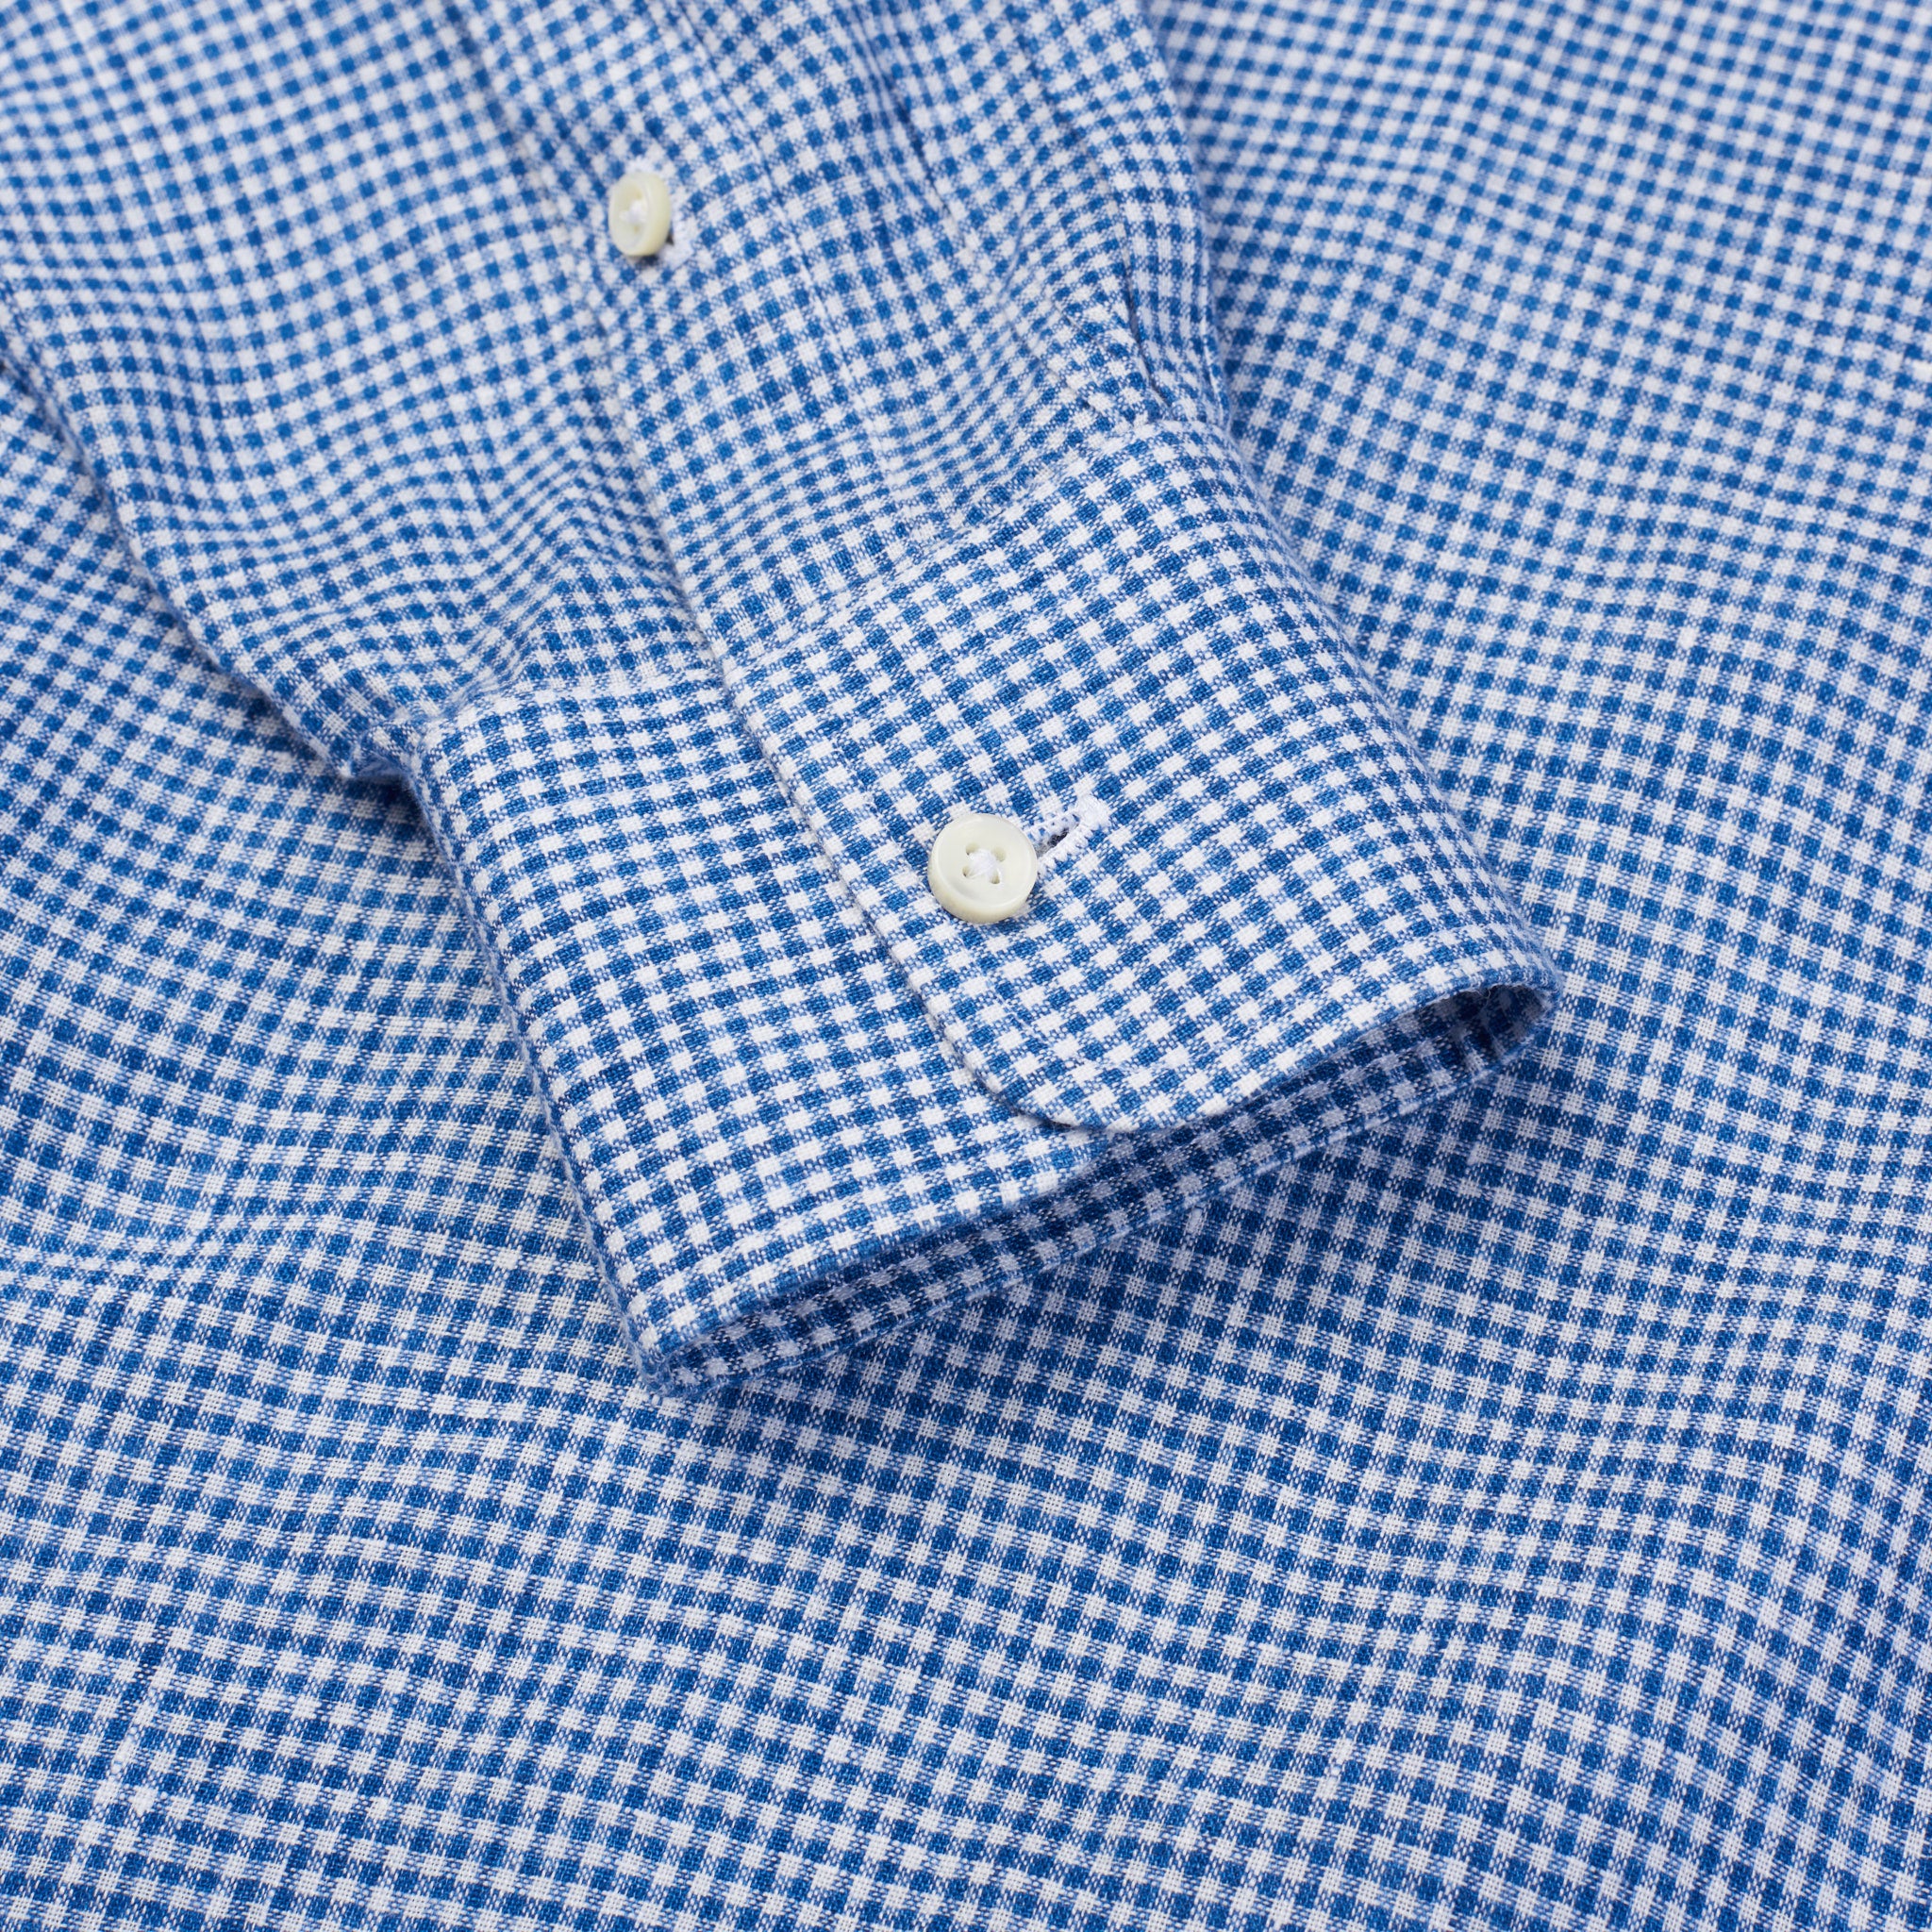 M.BARDELLI Milano Blue Gingham Check Linen 1 Pocket Casual Shirt NEW Size M